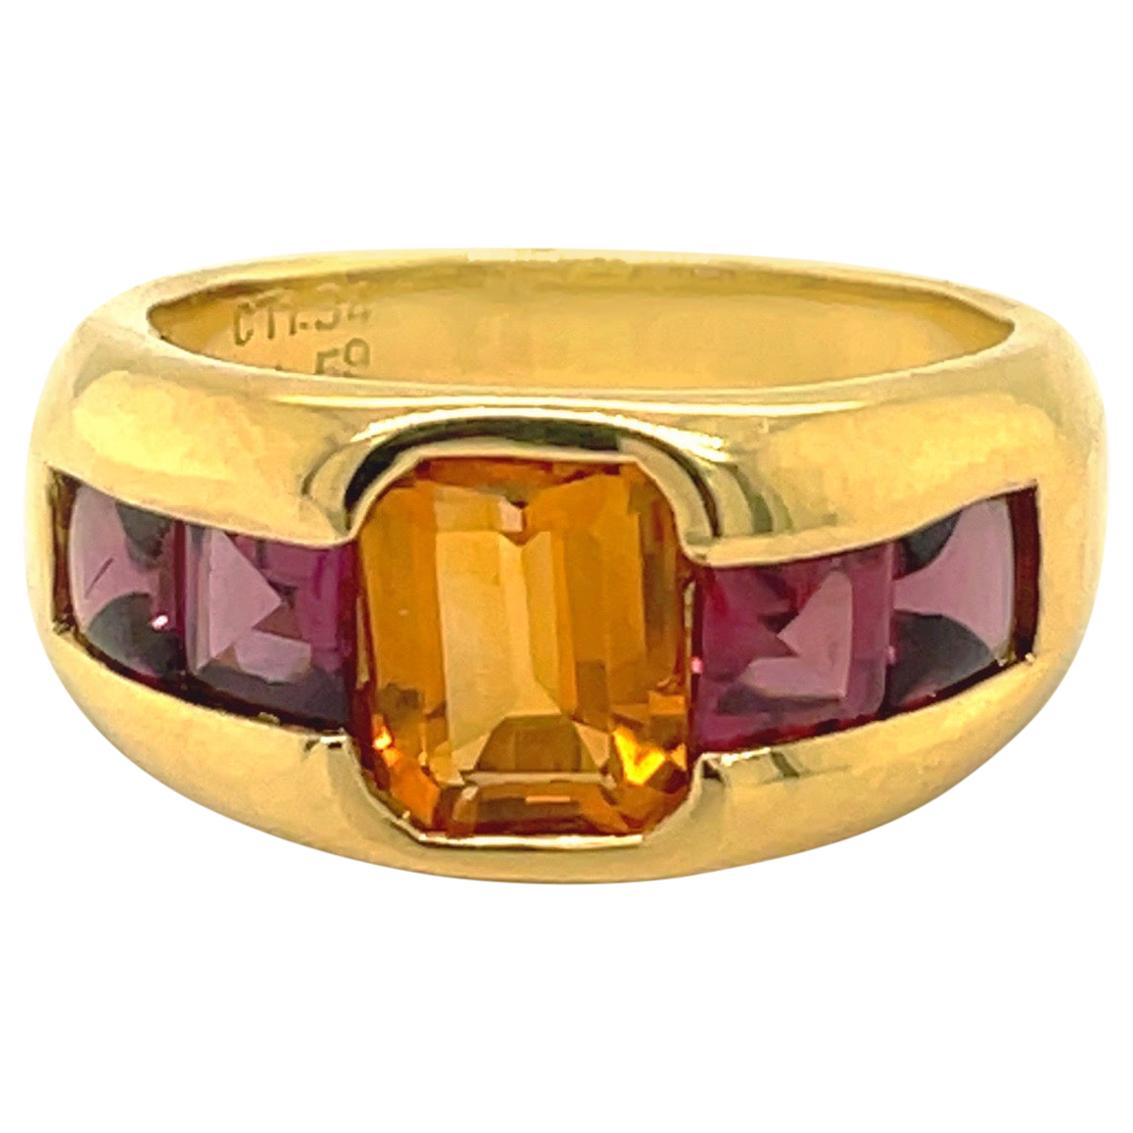 Gregg Ruth 18KT Yellow Gold Ring with 1.34Ct. Citrine Center & 1.59Ct. Rhodolite For Sale